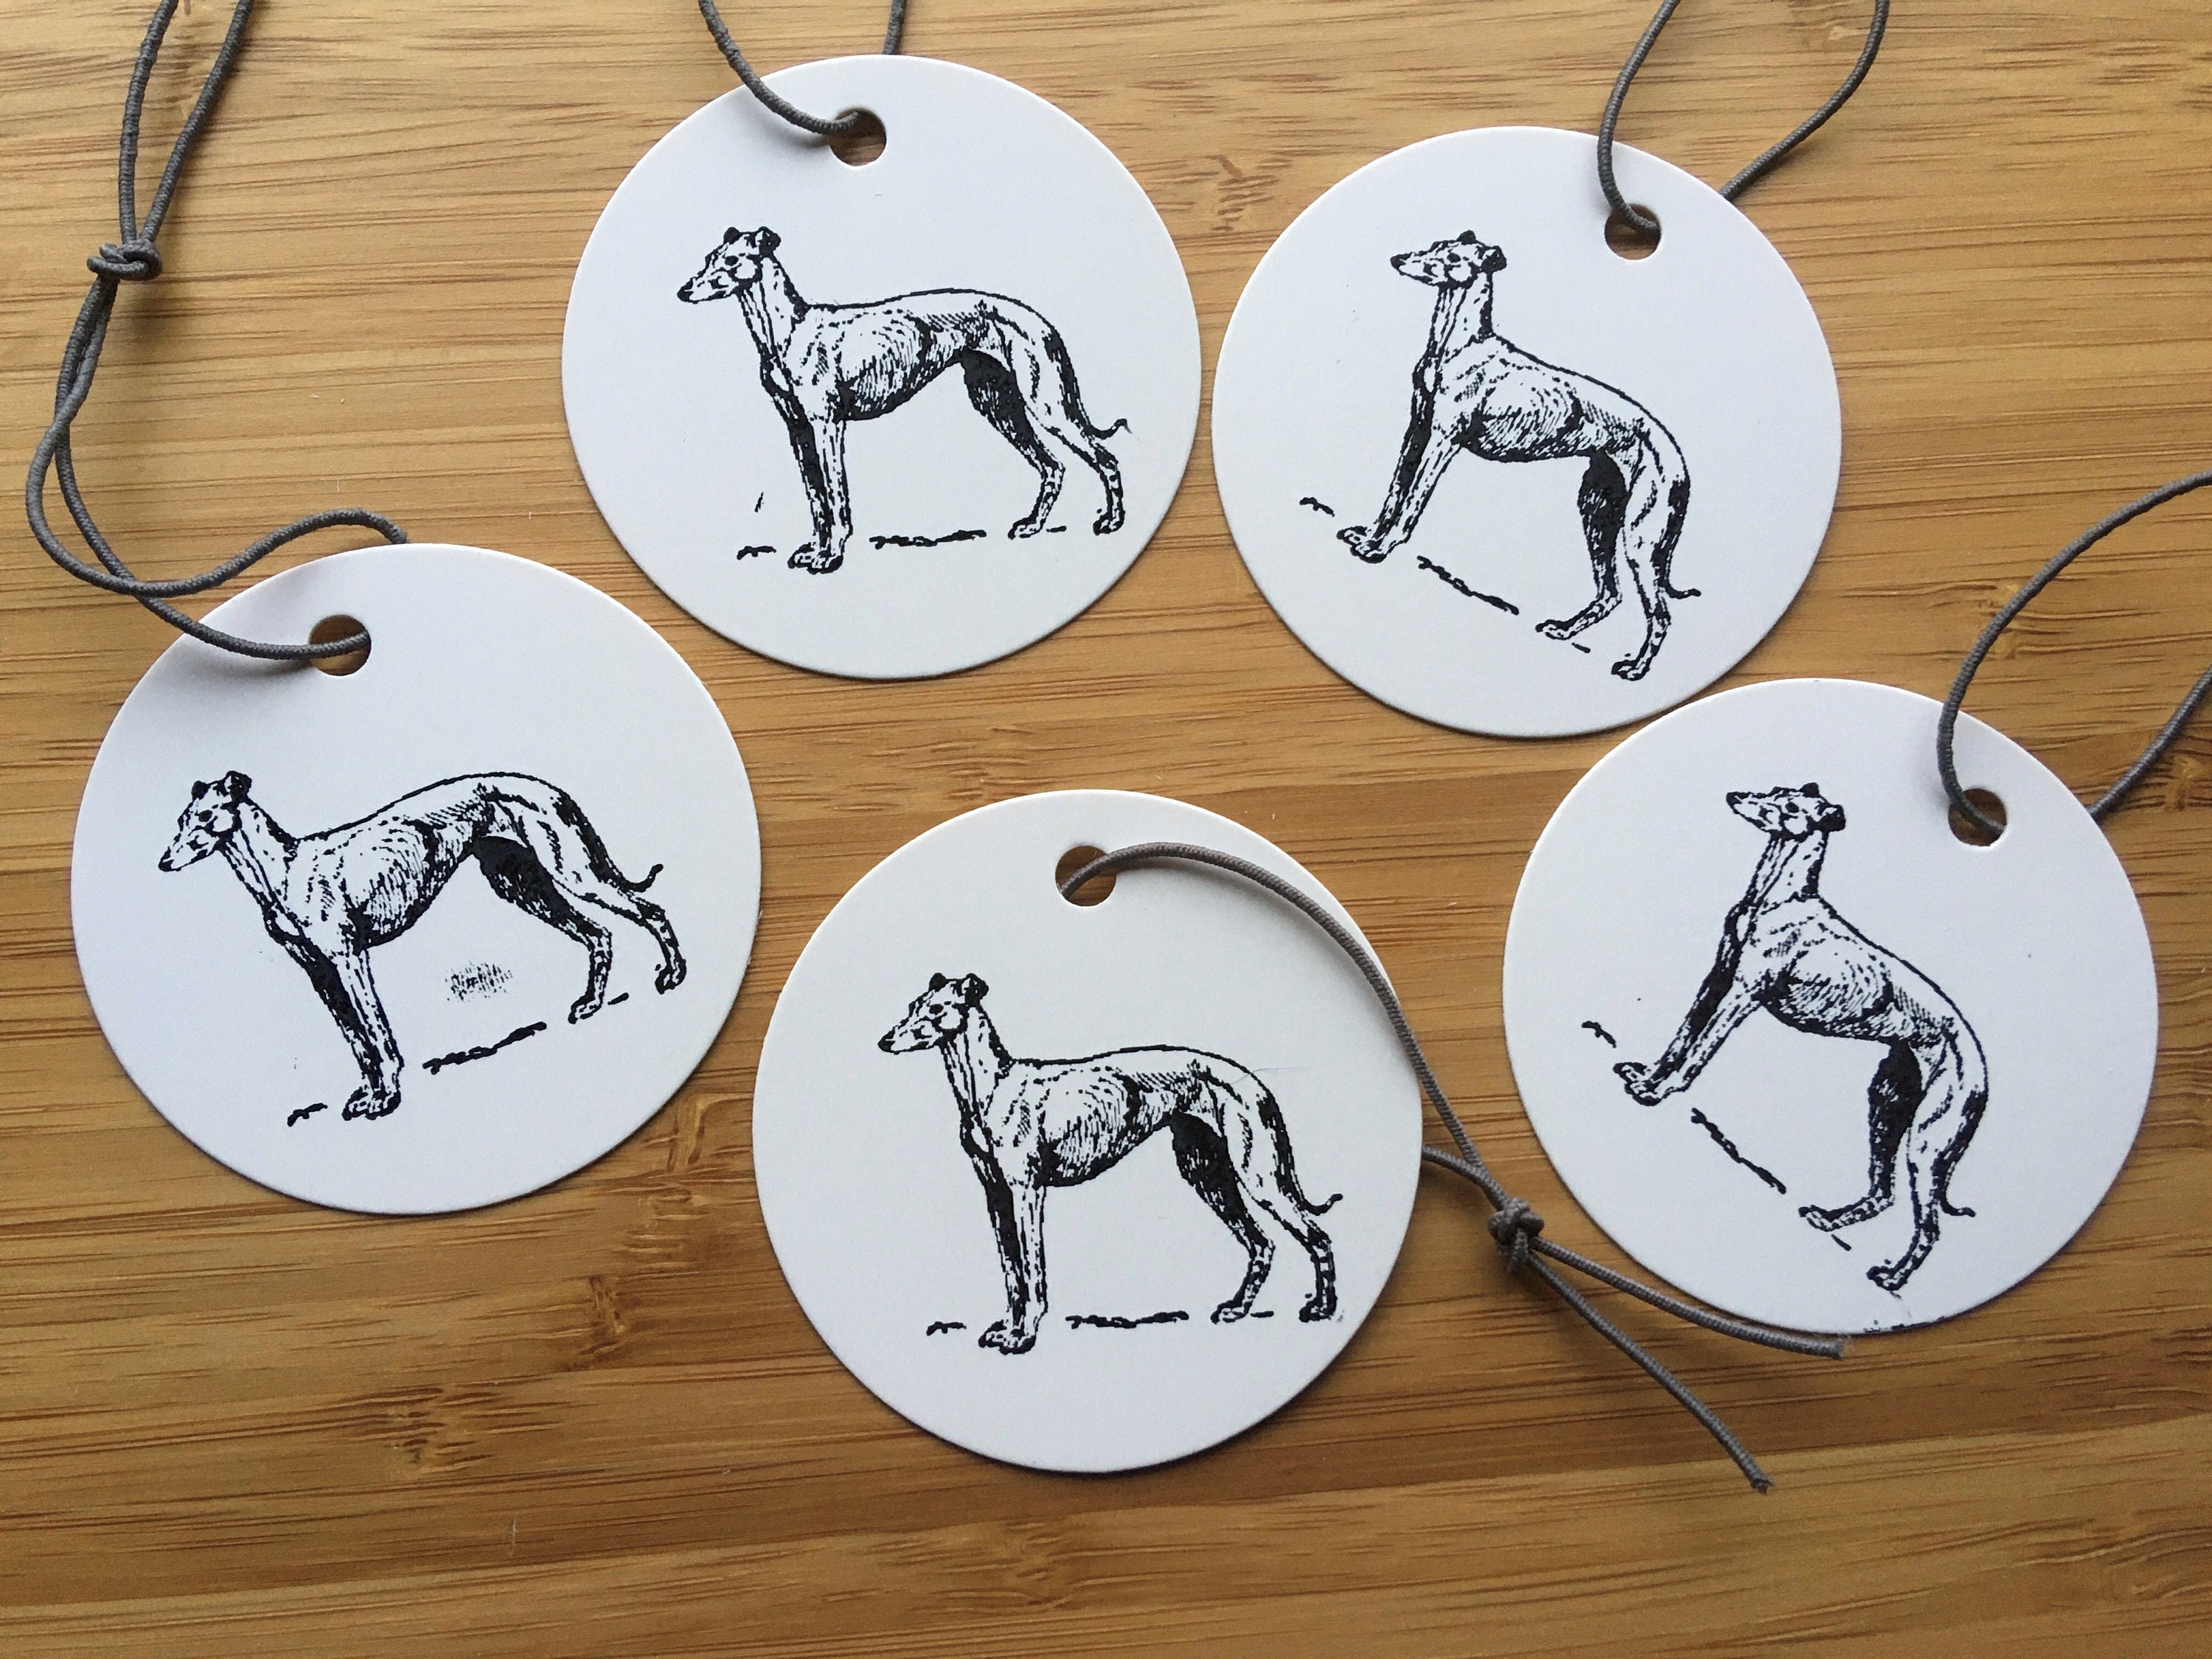 Whippet Gift Tags Sighthound Gift Tags Lurcher Gift Tags Greyhound Gift Tags Galgo Gift Tags Gift Wrapping Dog Gift Tags Hand Printed Tags